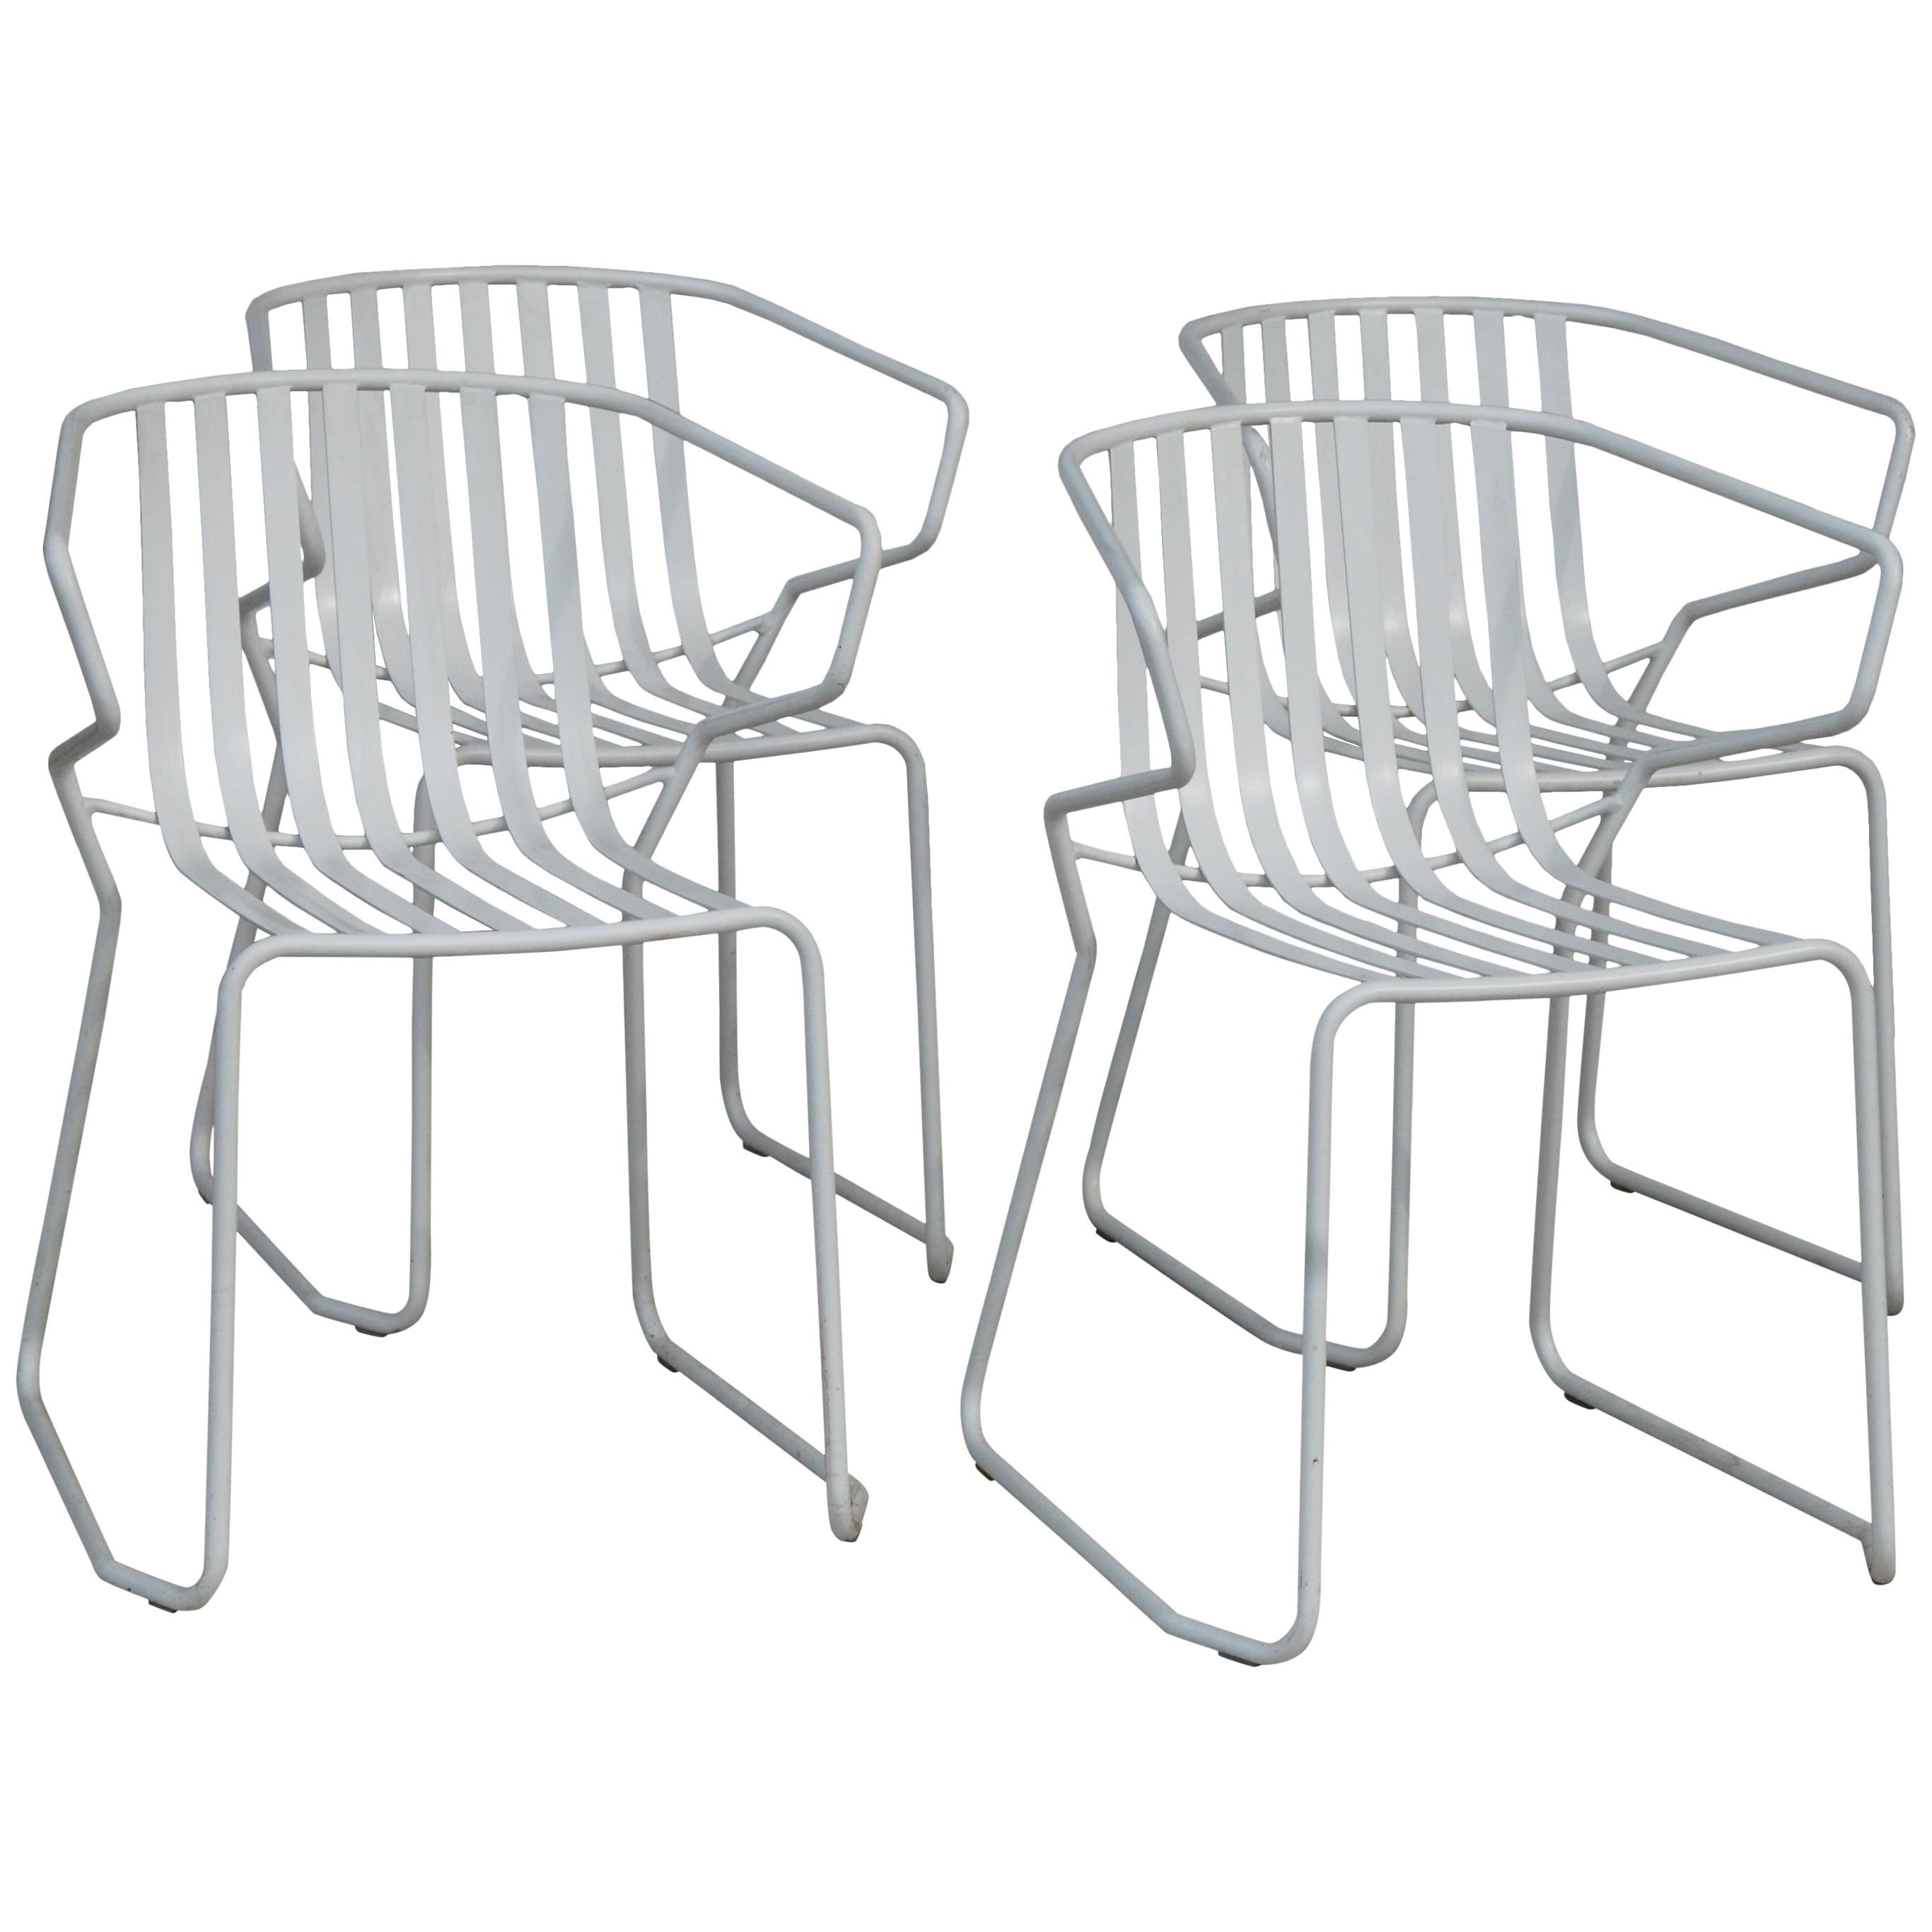 Set of 4 Italian Outdoor Chairs